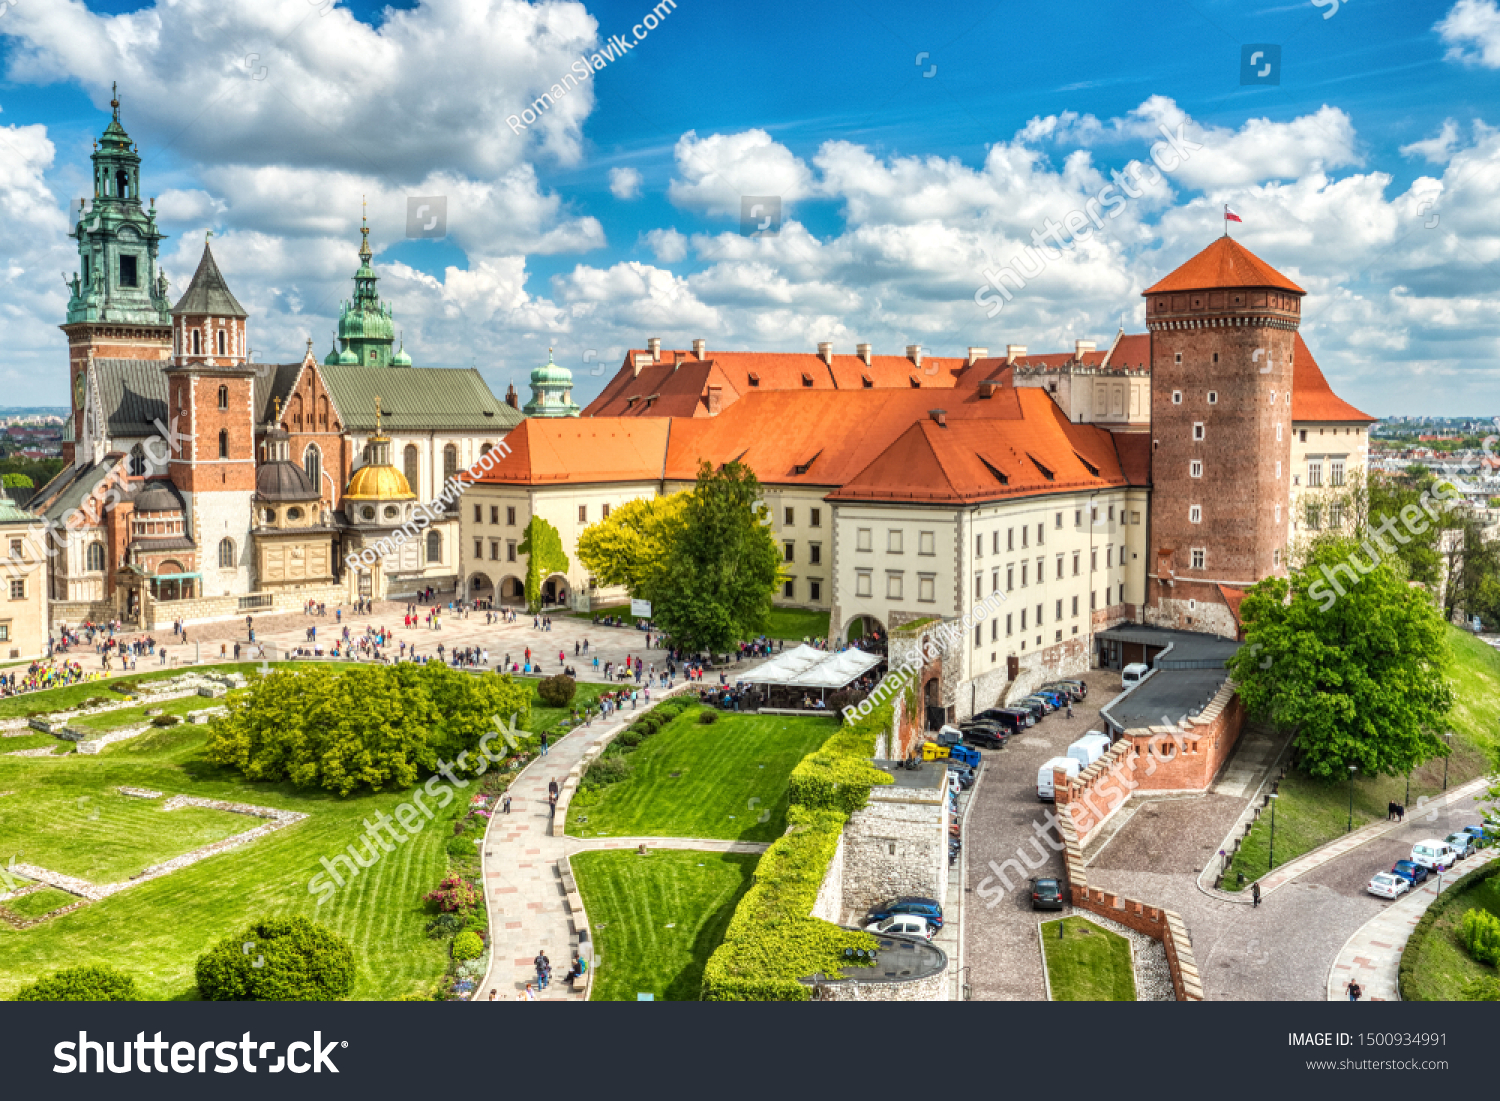 Wawel Castle during the Day, Krakow, Poland #1500934991